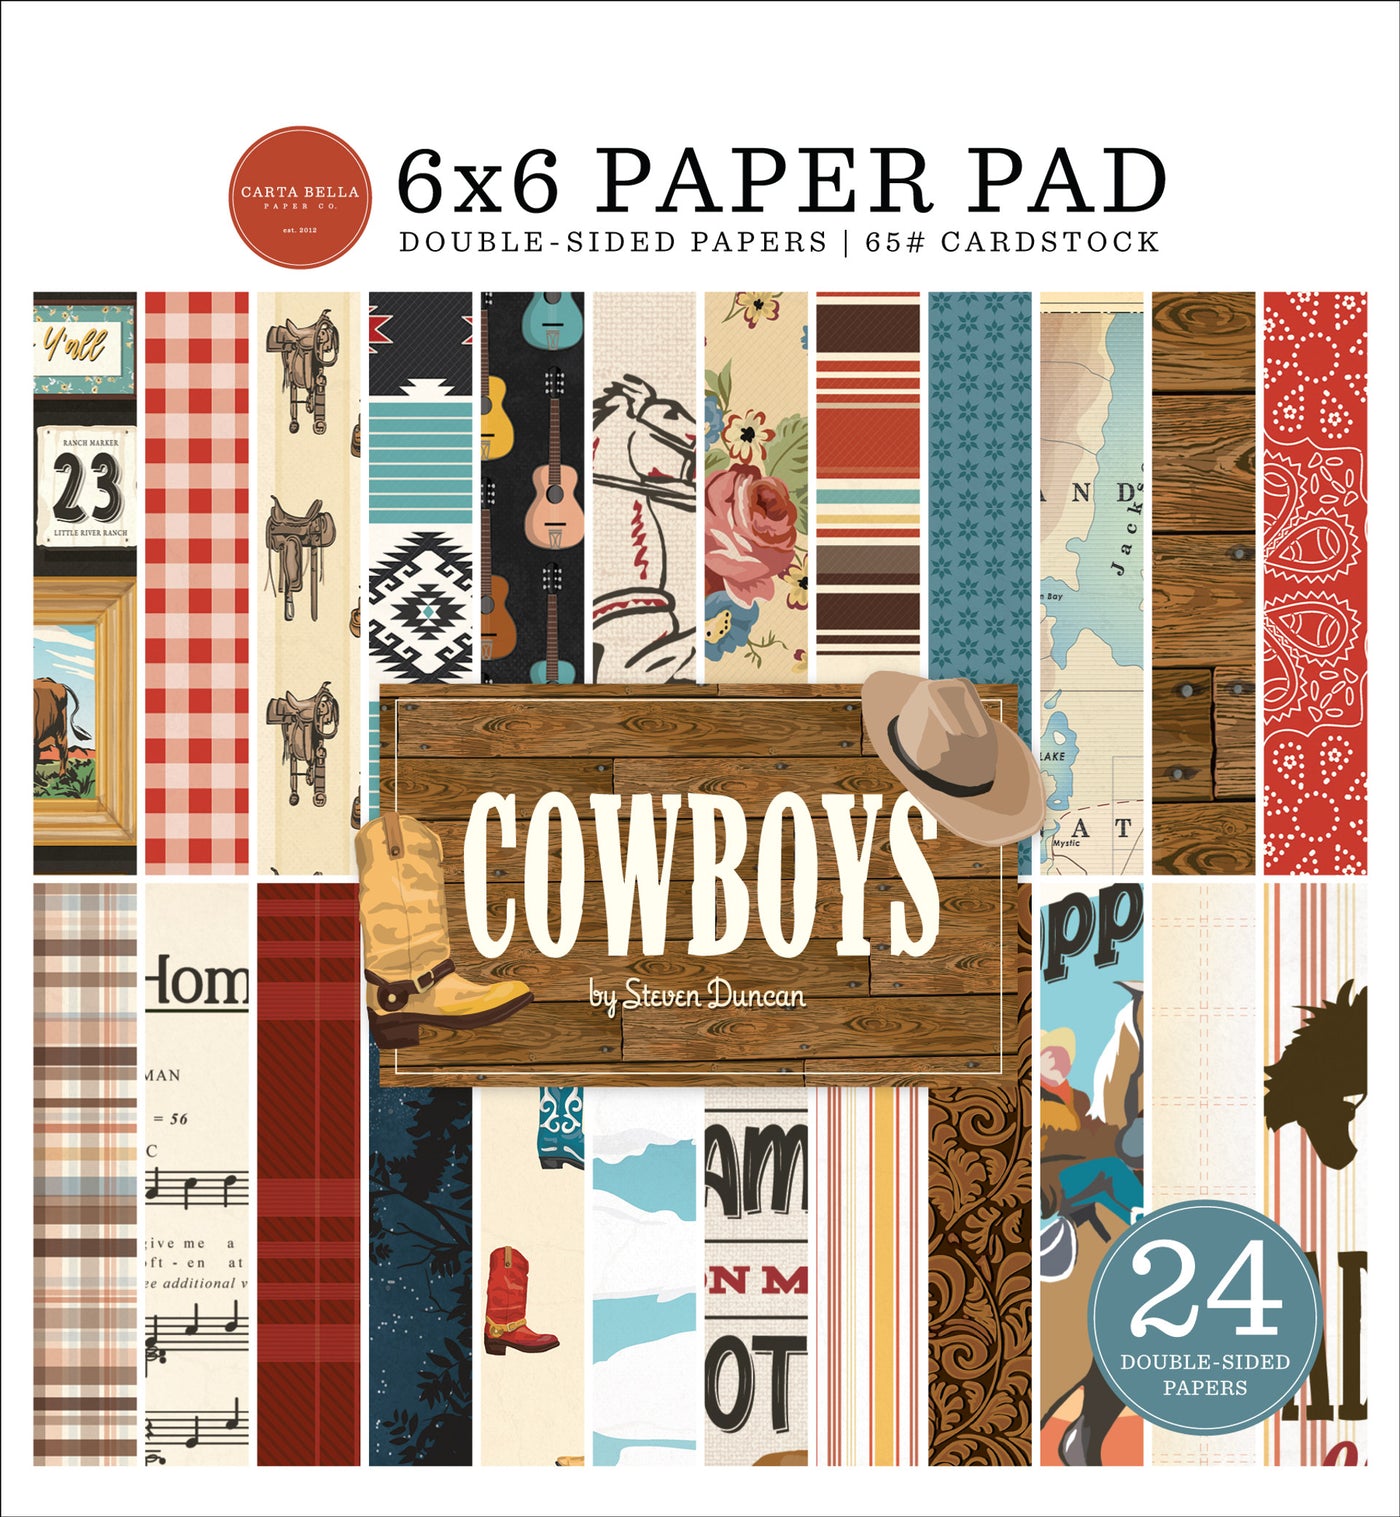 Things you see at the ranch in bright, fun colors. Versatile 6x6 pad with 24 double-sided sheets. Great for card making and pages. From Carta Bella Paper Co.